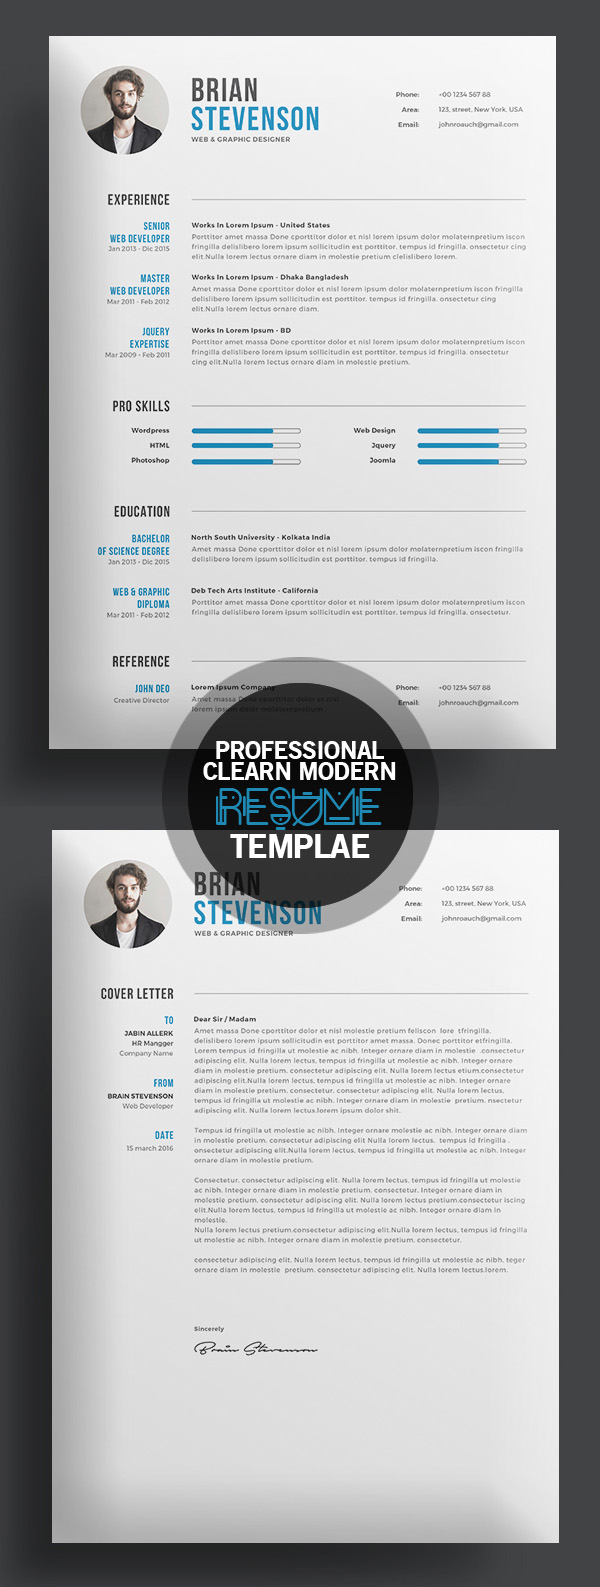 50 Best Resume Templates For 2018 - 31